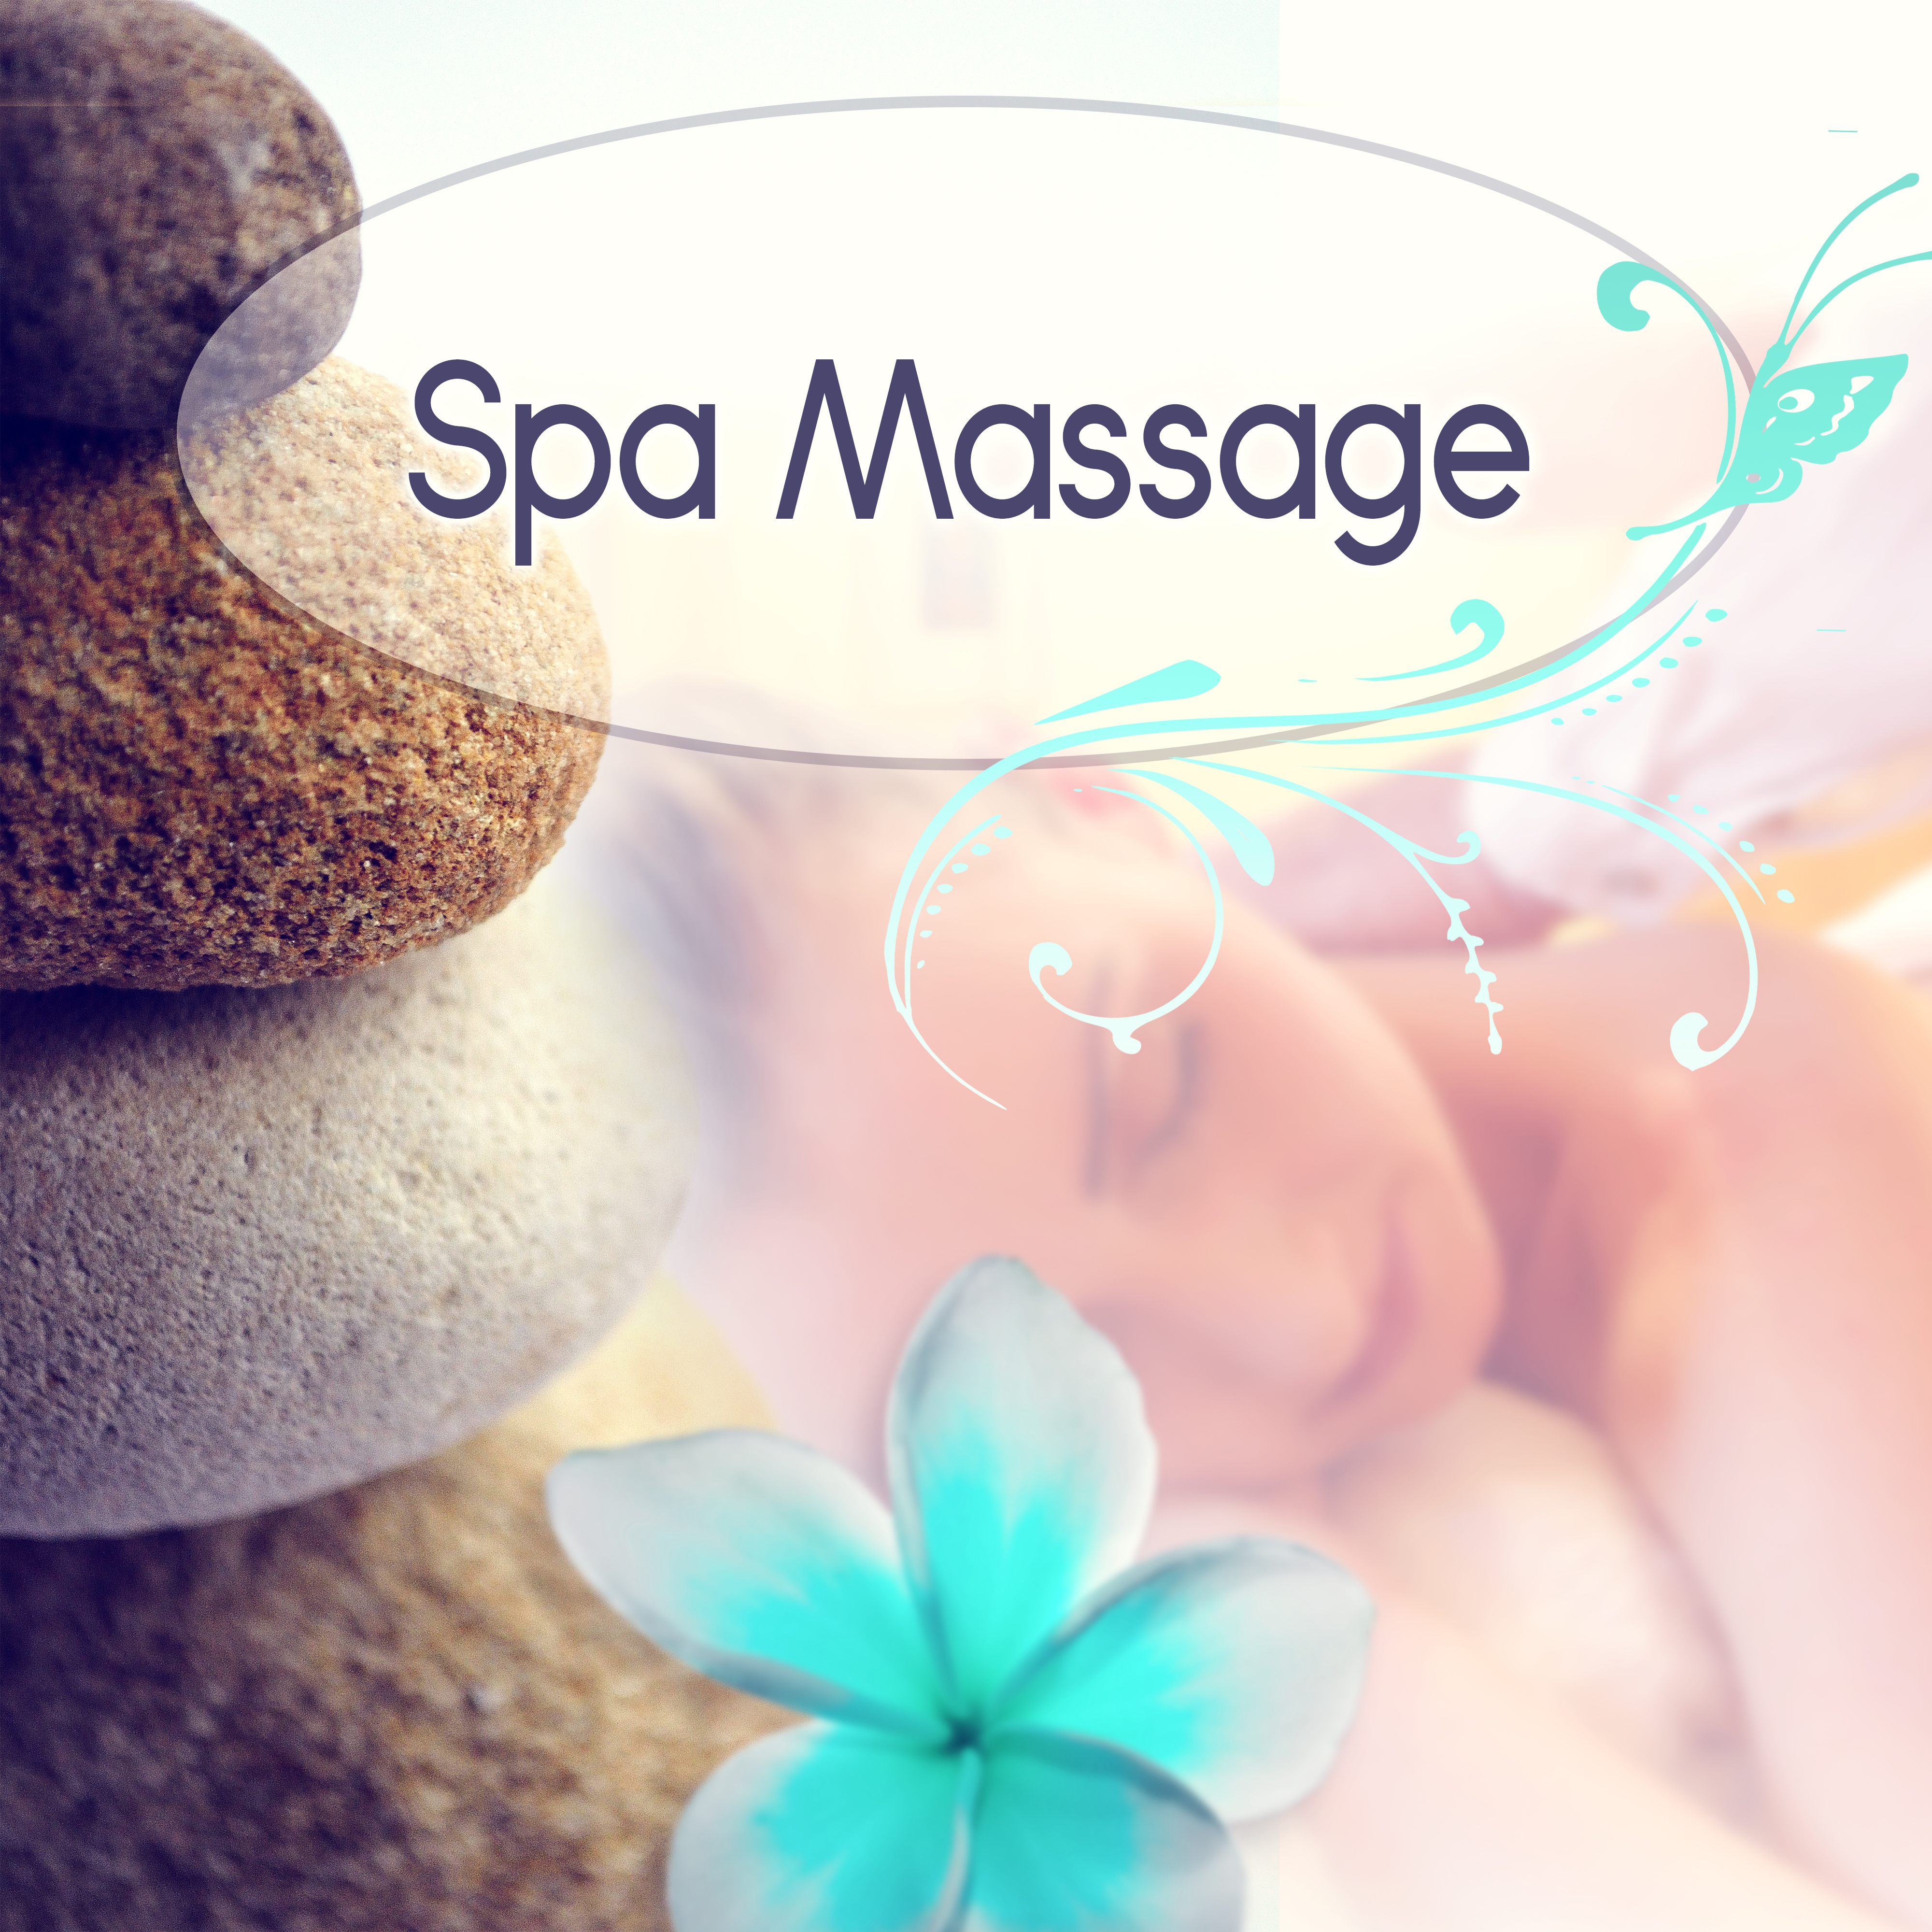 Spa Massage  Good Mood, Relaxing Nature Sounds, New Age, Deep Relaxation